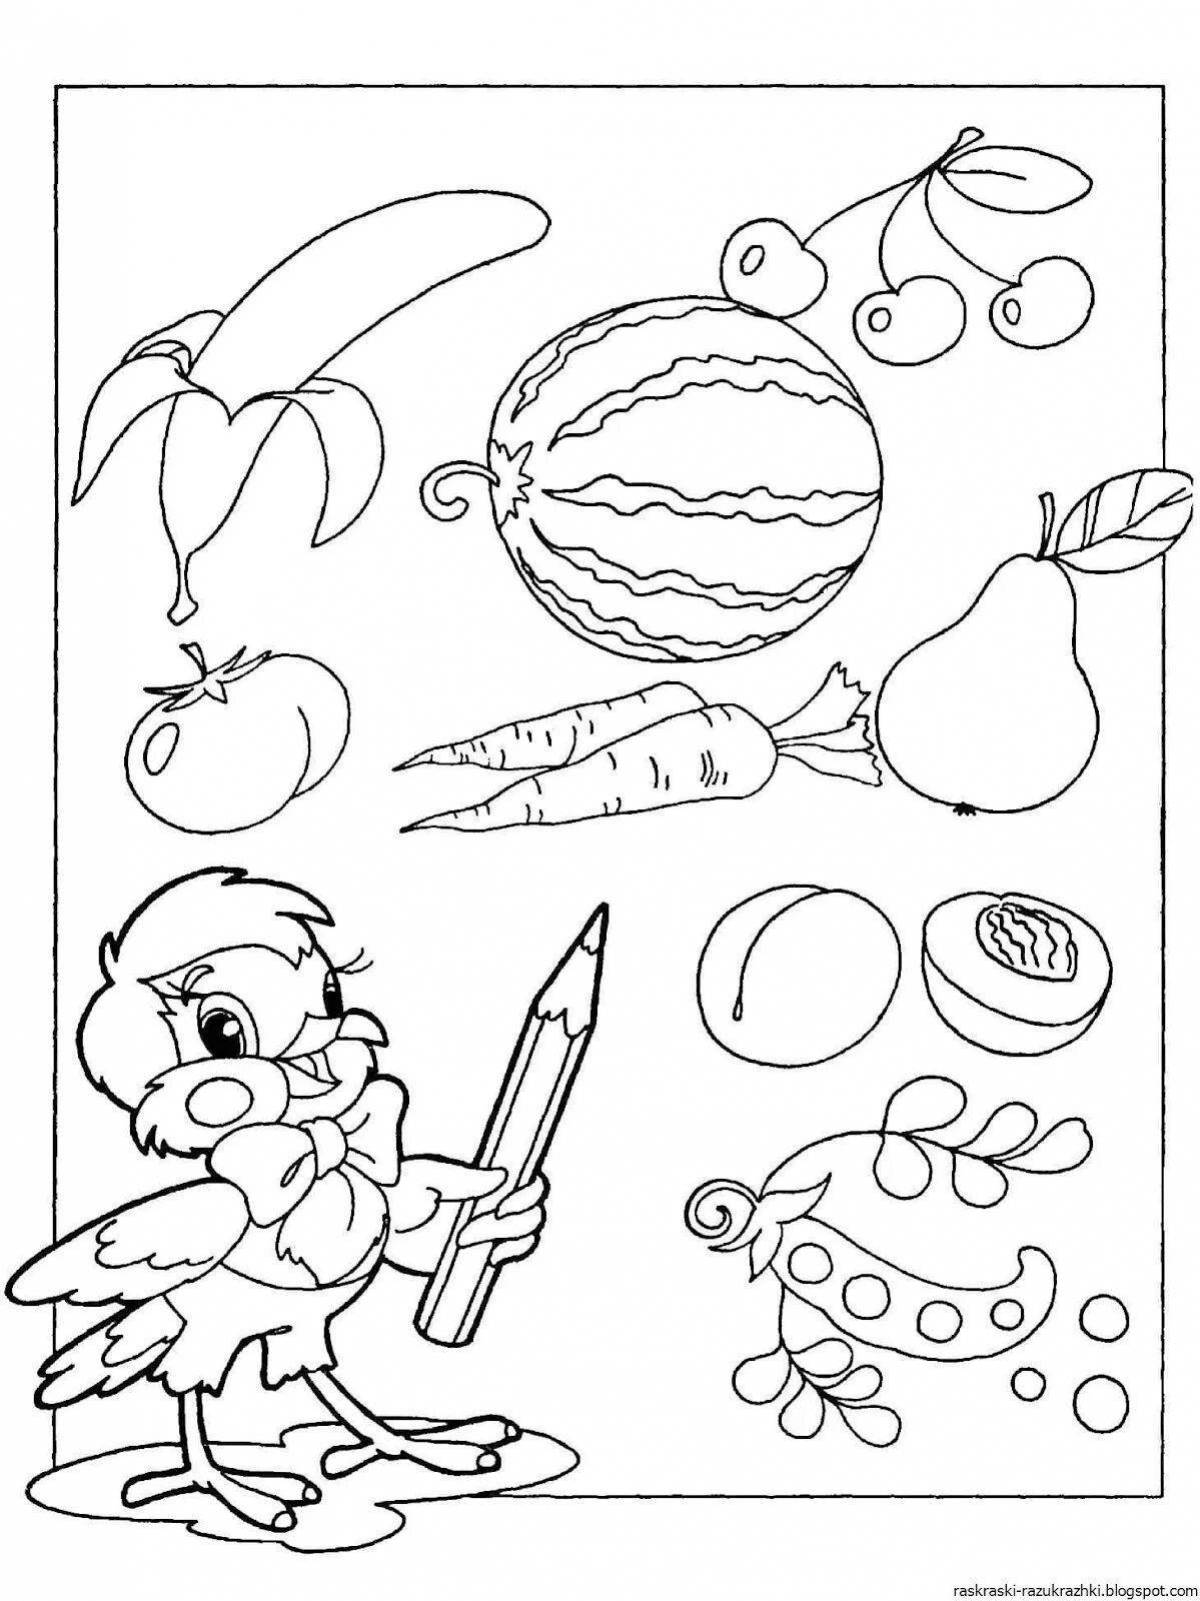 Entertaining educational coloring book for children 3-4 years old